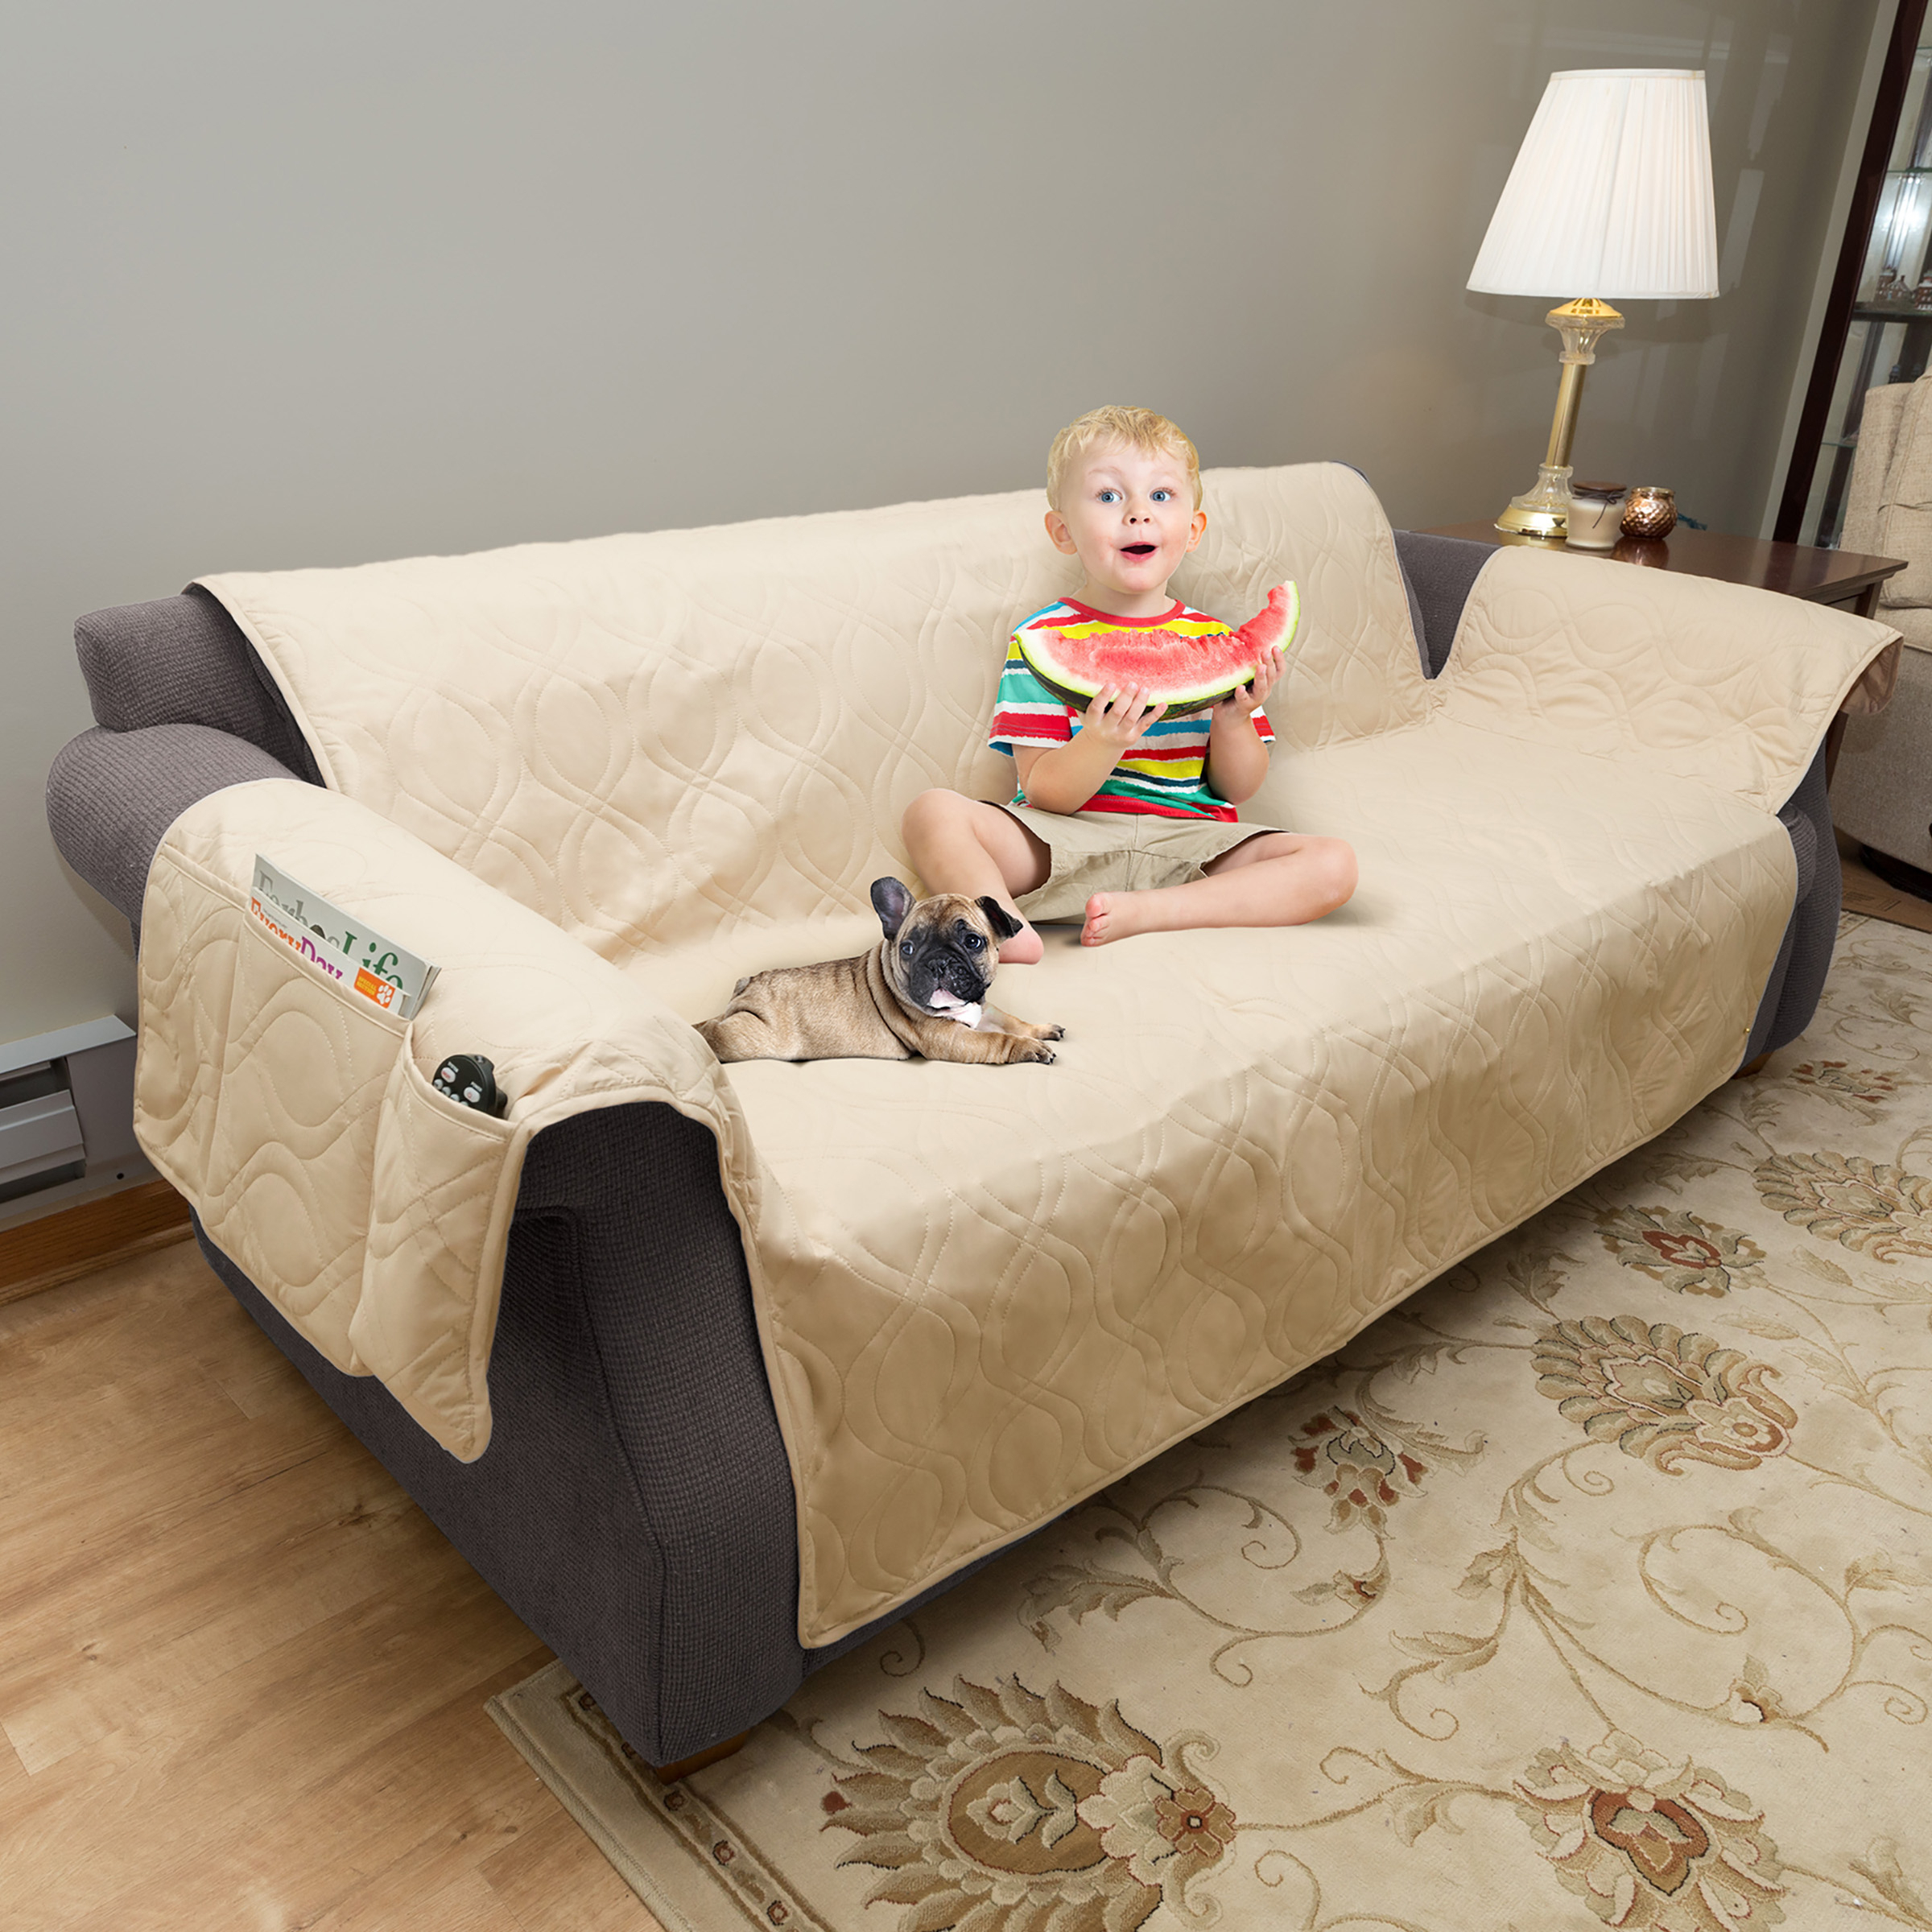 Furniture Cover Waterproof Couch Sofa Protector Kids Pets Dogs Stain Resistant - Tan